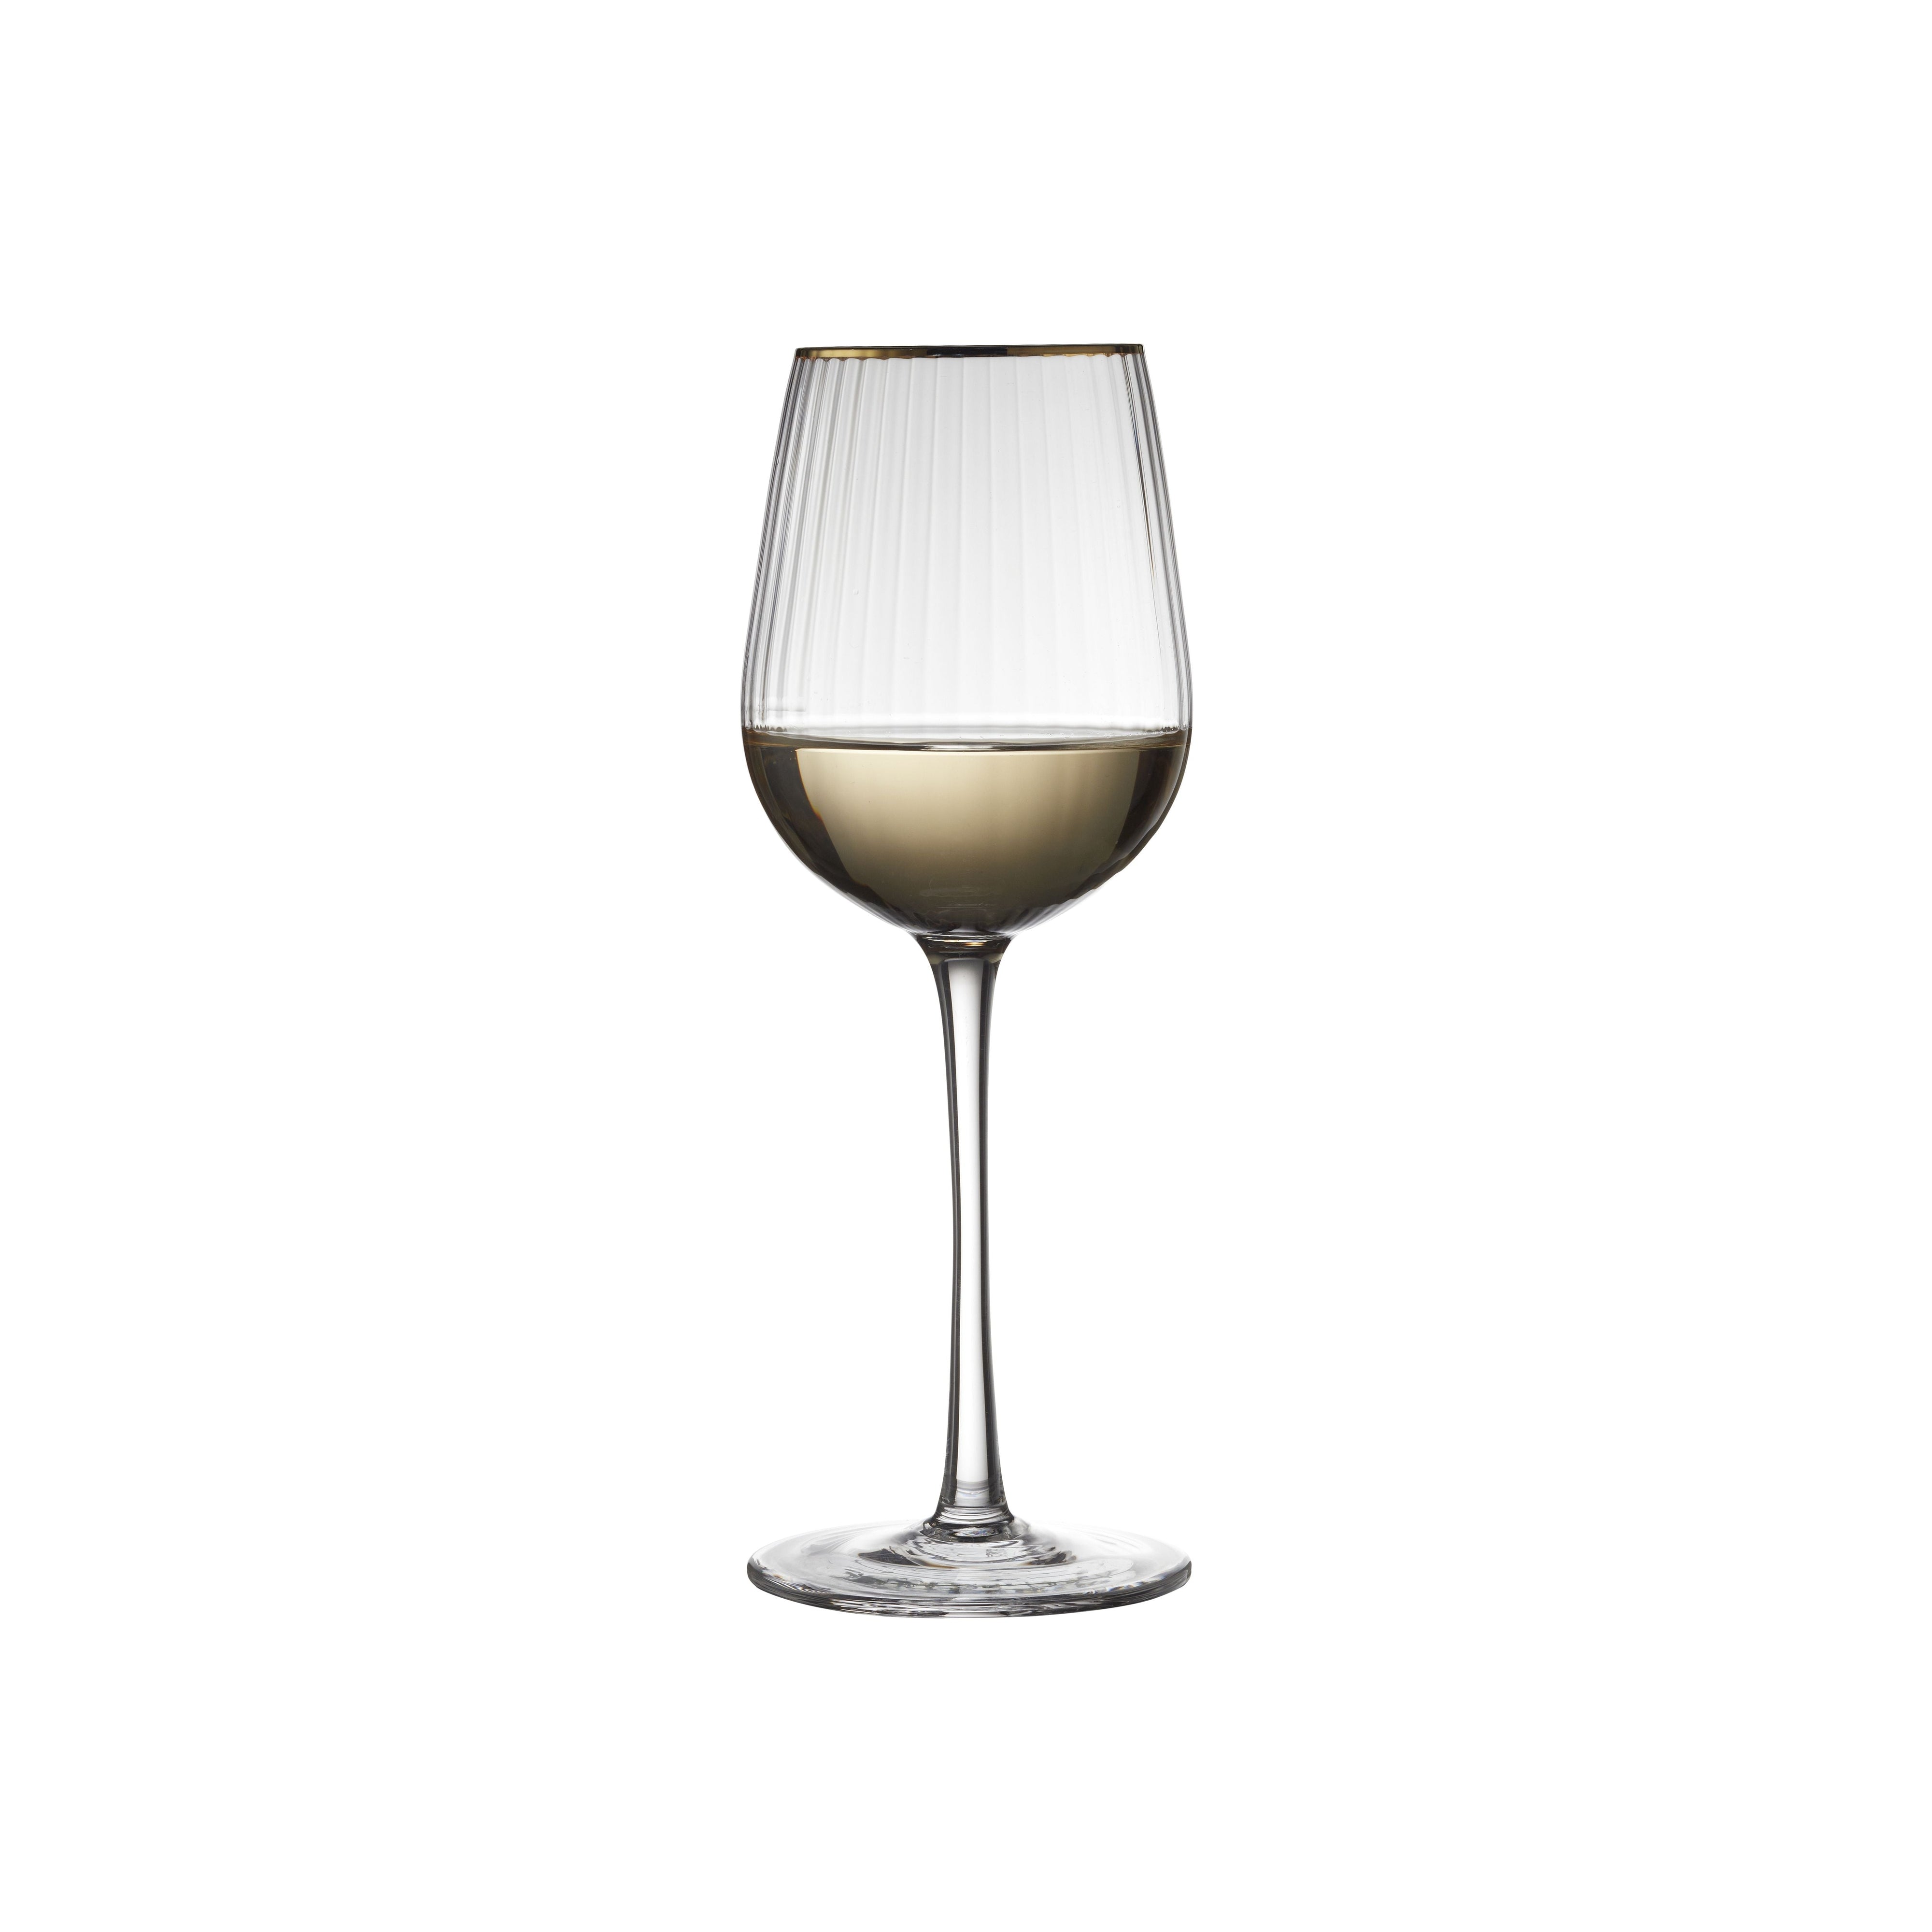 Lyngby Glas Palermo Gold White Wine Class 30 Cl 4 PC.